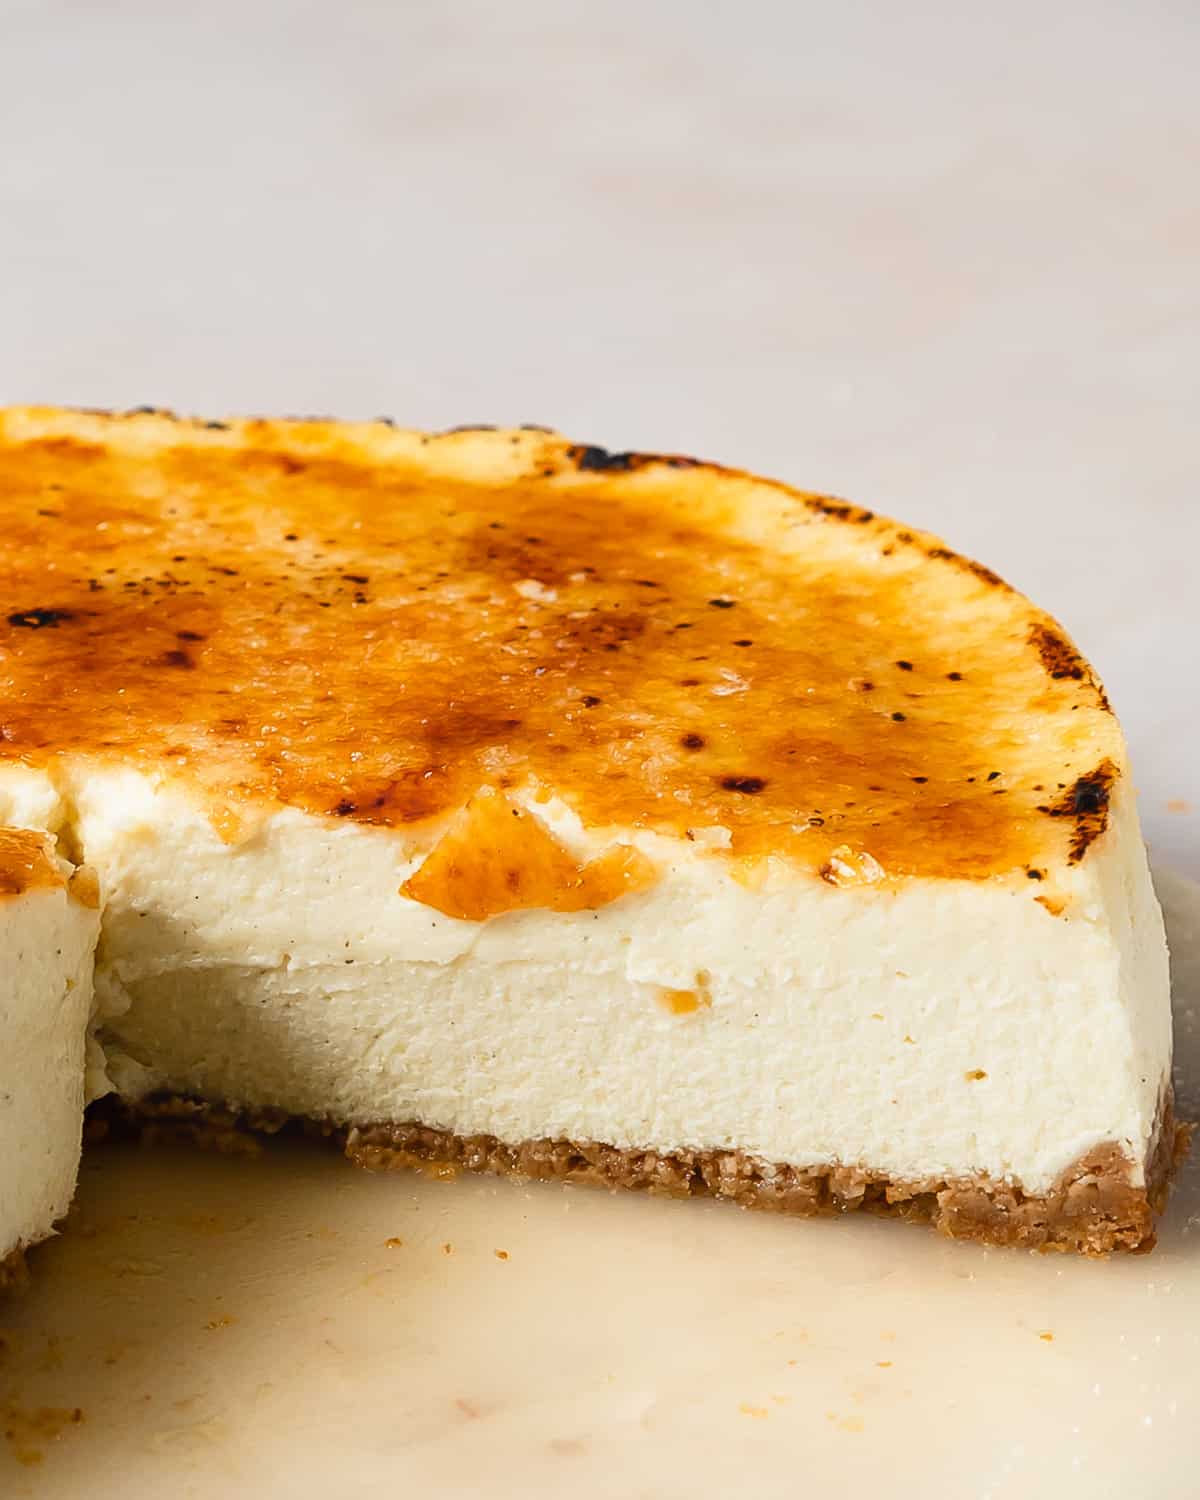 Creme Brulee Cheesecake is a thick, rich and creamy vanilla bean cheesecake with a classic graham cracker crust. This decadent cheesecake is topped with a beautiful golden brown bruleed sugar crust. Make this brulee cheesecake the next time you need a simple, stunning and celebratory dessert.